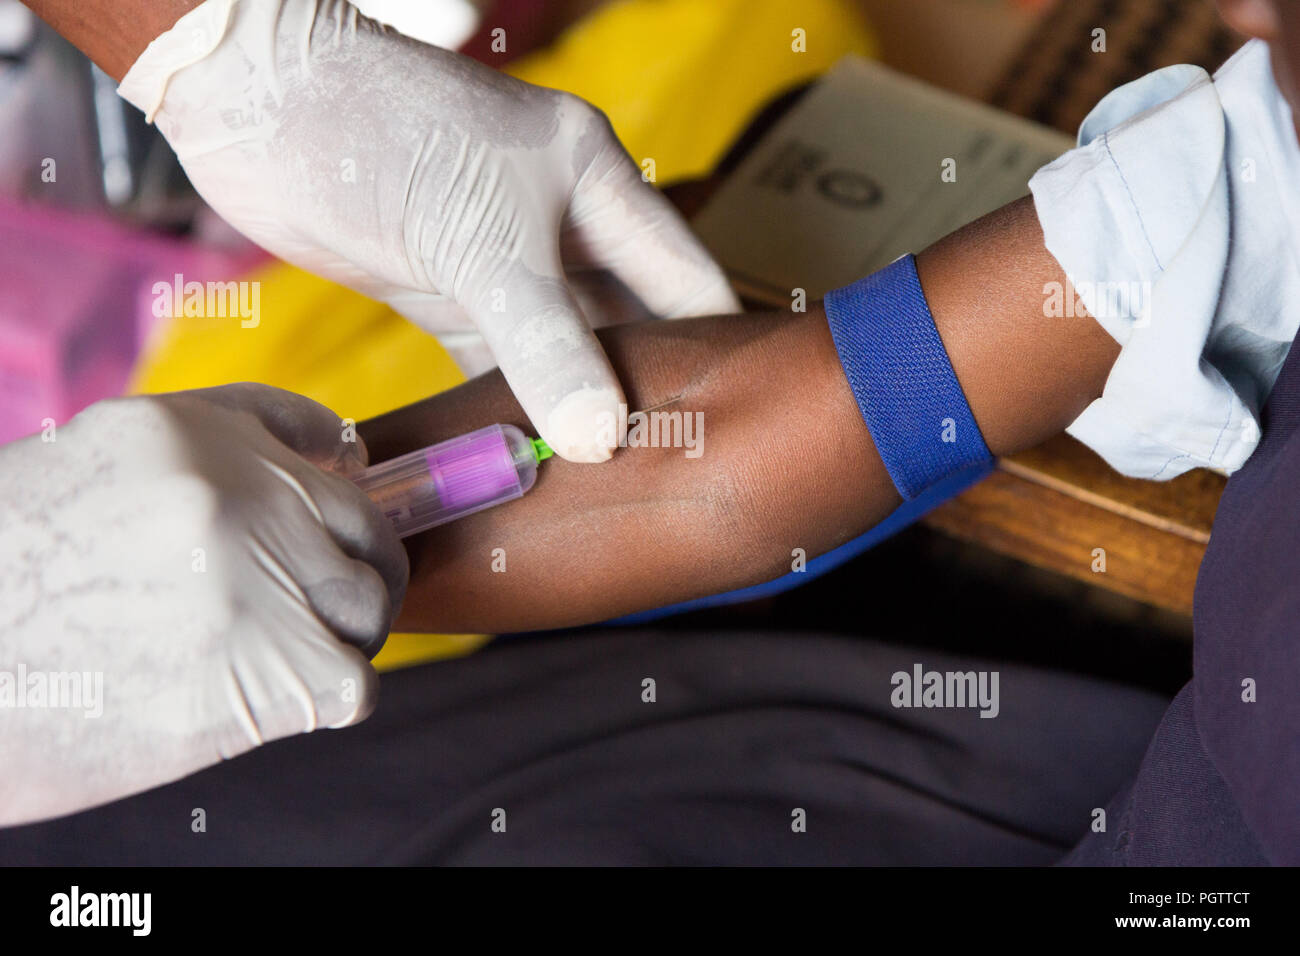 a health worker taking a blood sample from the cubital vein by piercing the vein and collecting blood into a test tube under negative pressure Stock Photo